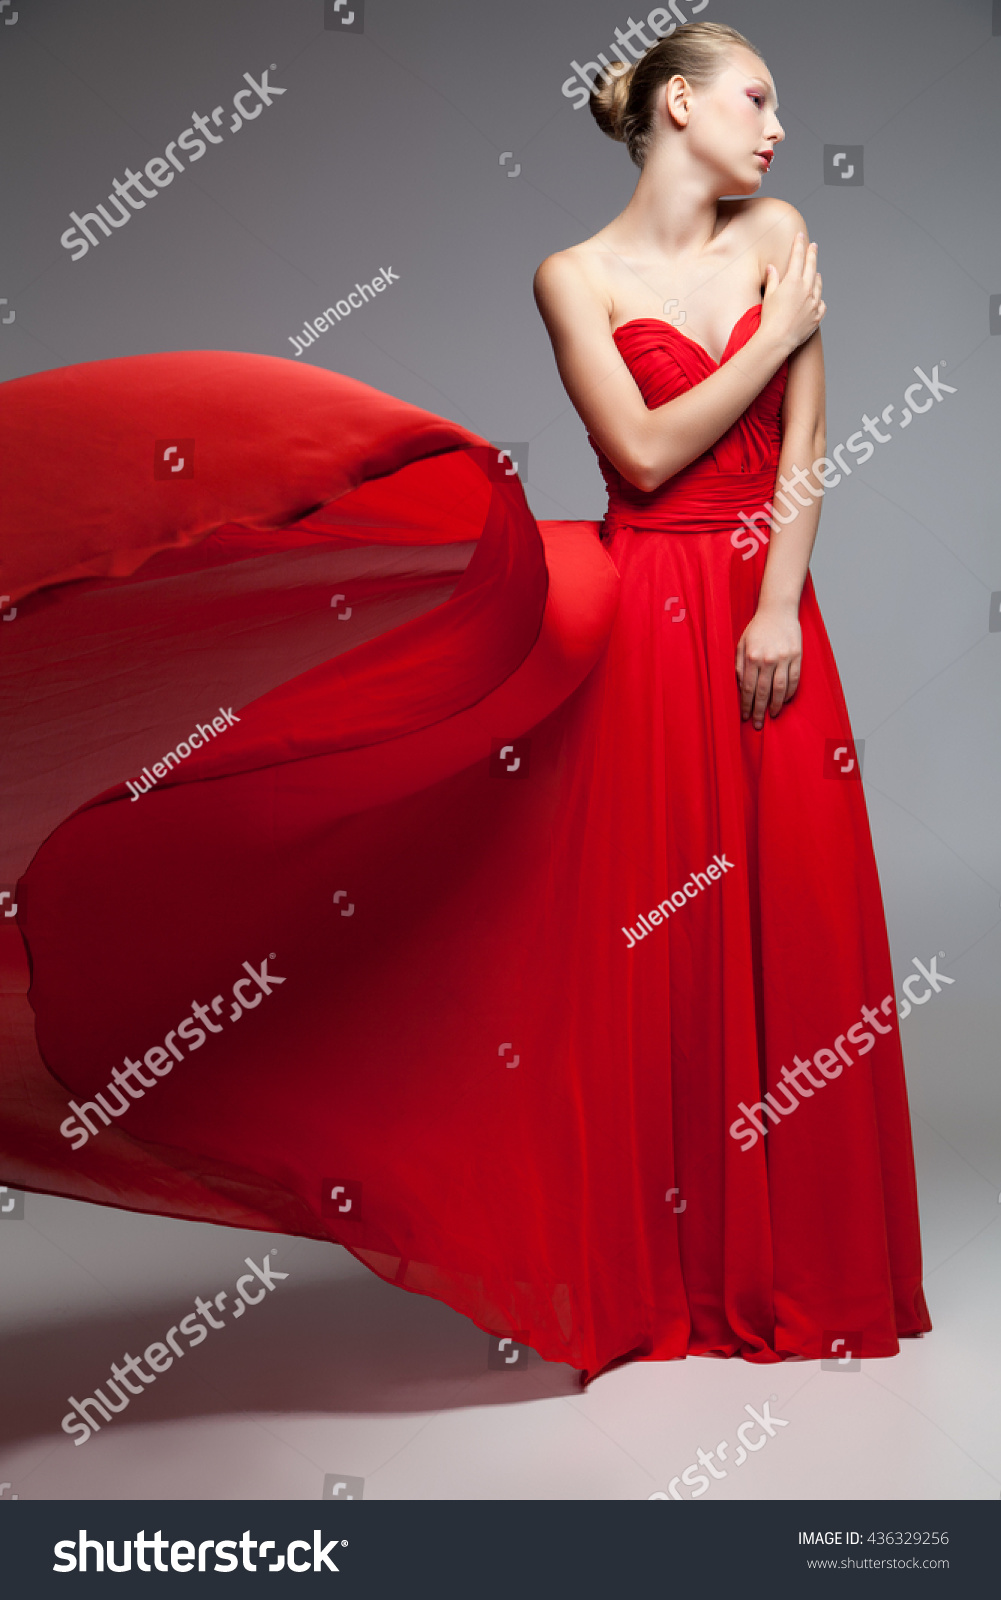 Young Blonde Girl Red Dress Flying Stock Photo 436329256 - Shutterstock